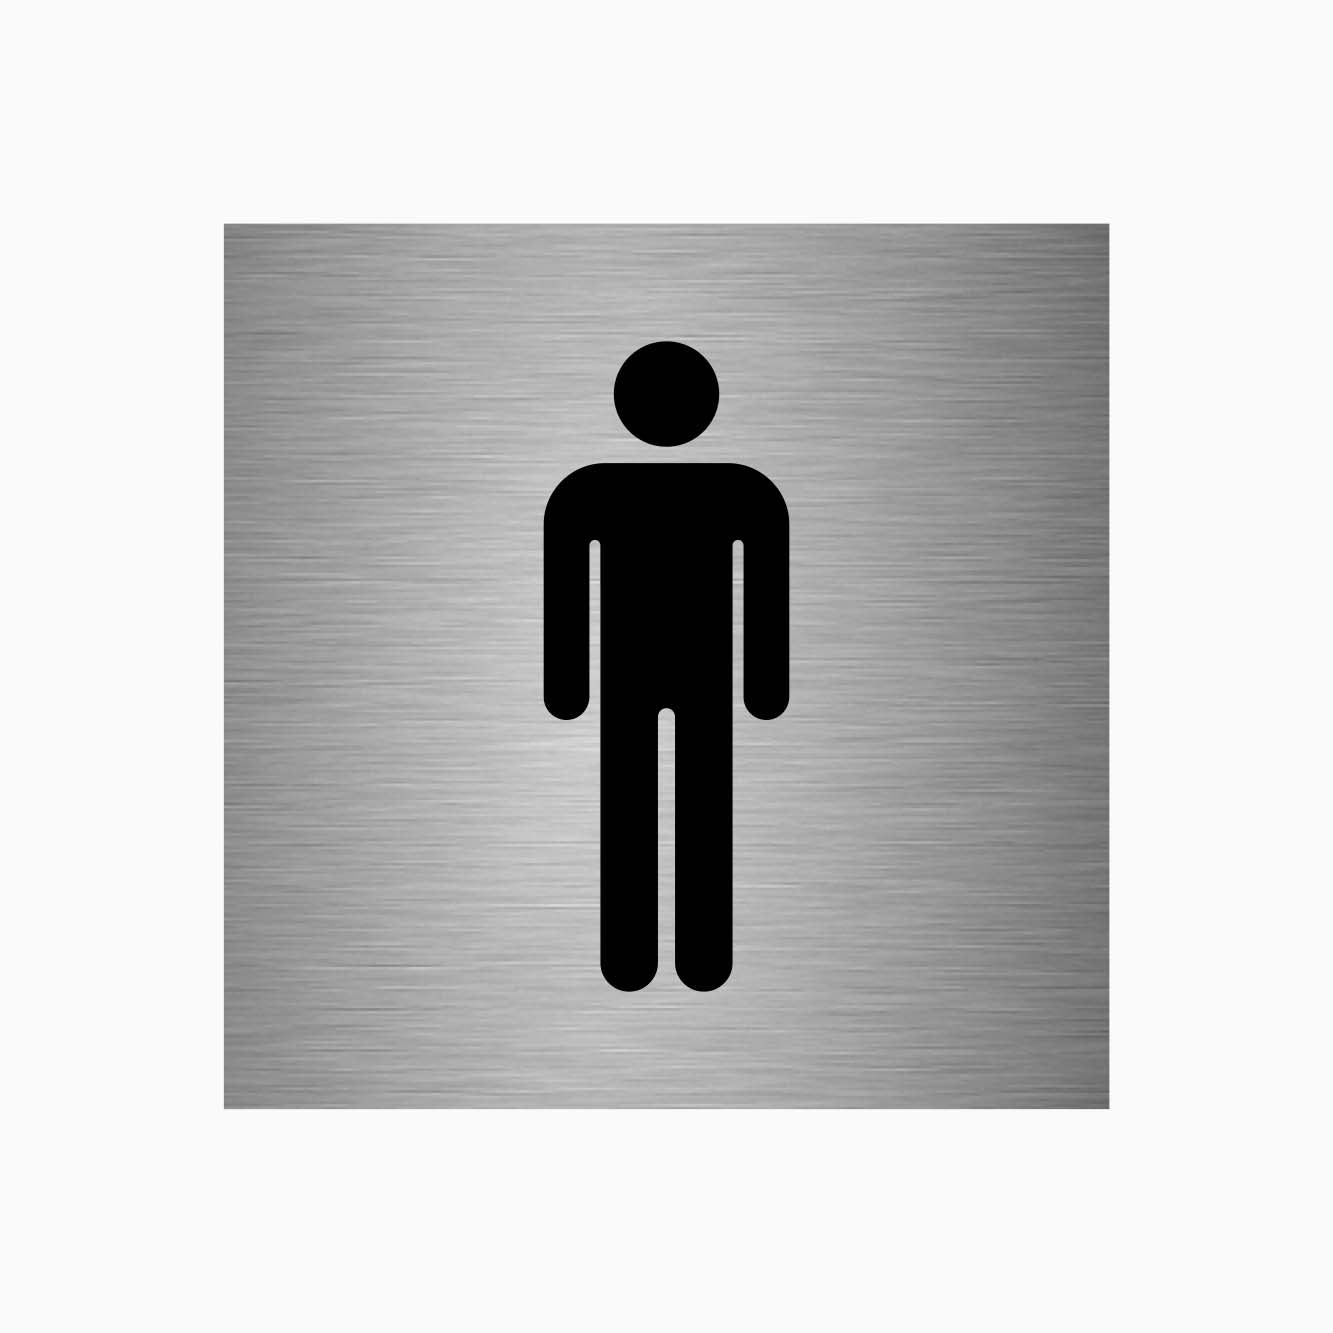 MALE TOILET SIGN - GET SIGNS